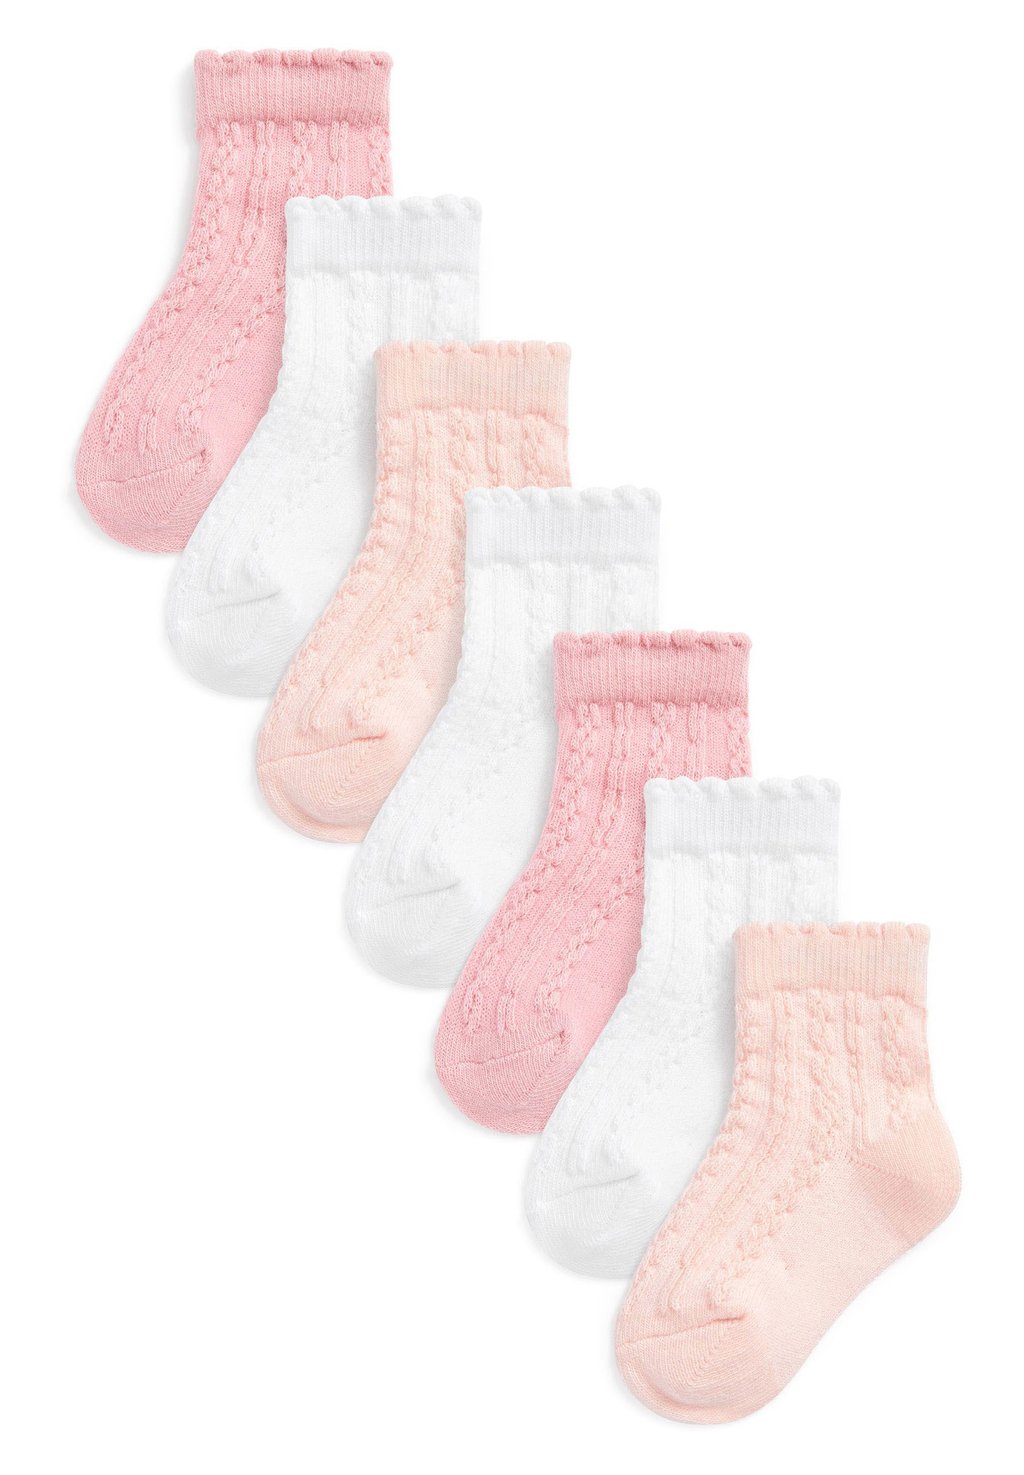 Носки 7 PACK Next, цвет pink/white cable knit